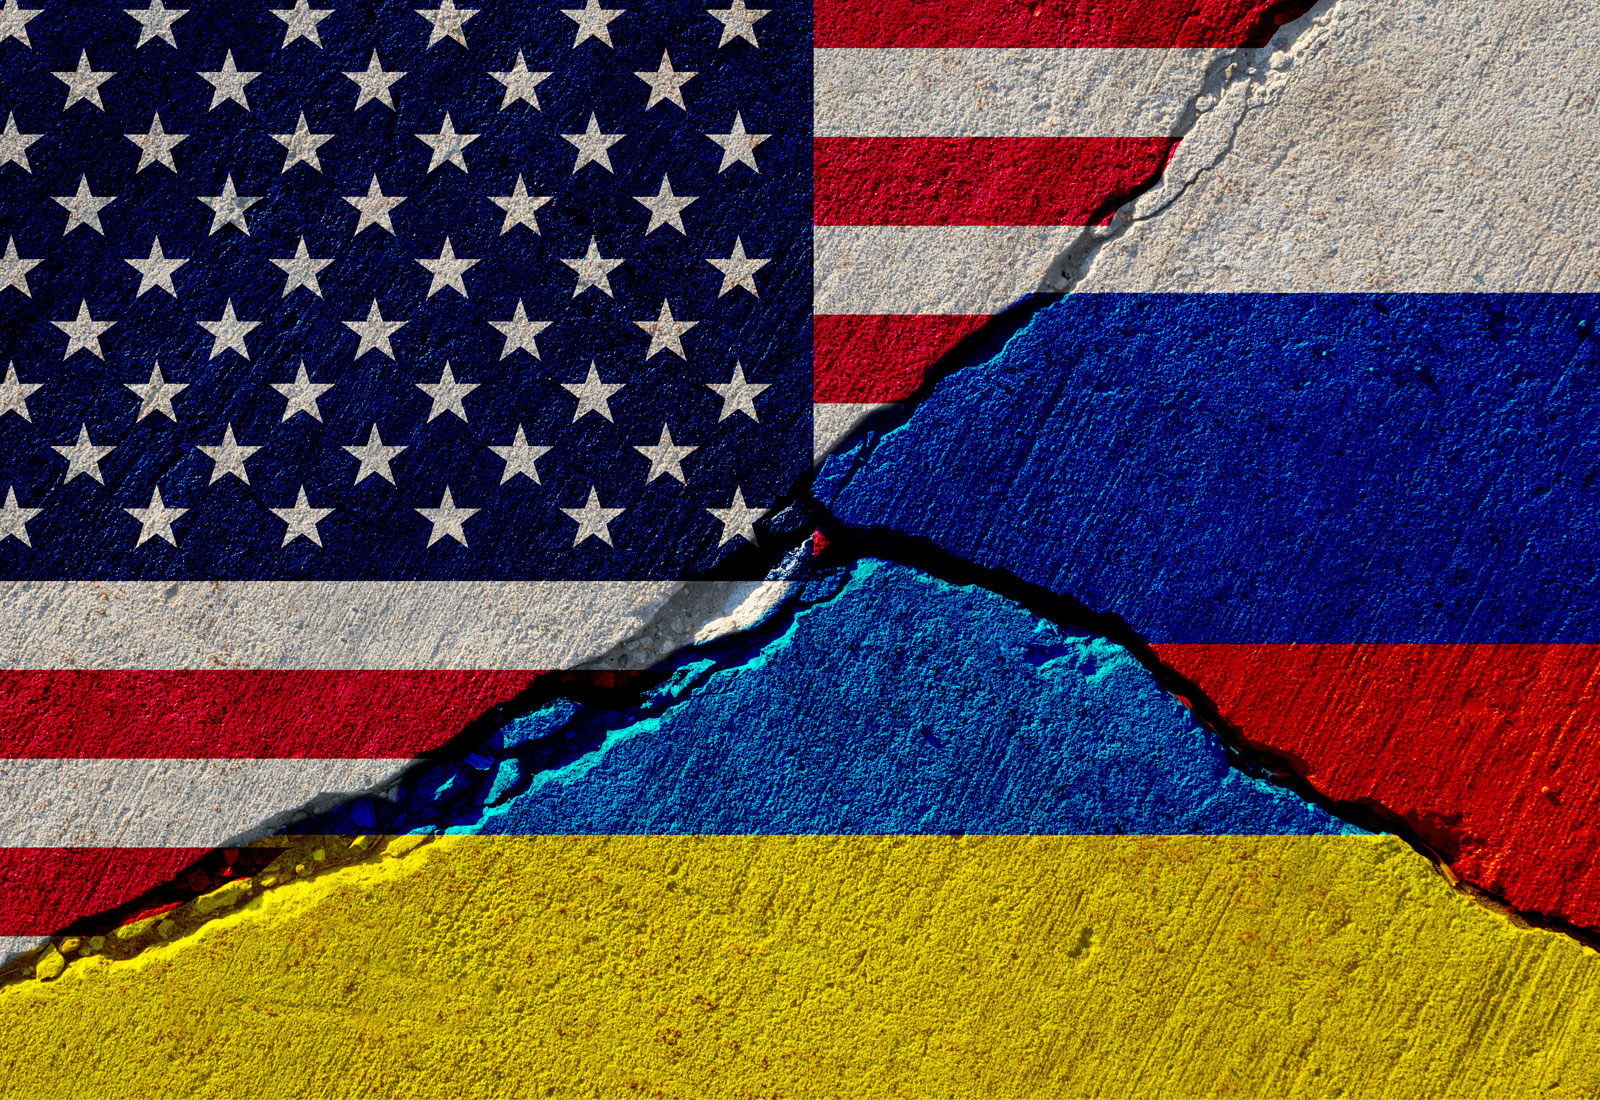 Escalation Management in Ukraine: Assessing the U.S. Response to Russia’s Manipulation of Risk